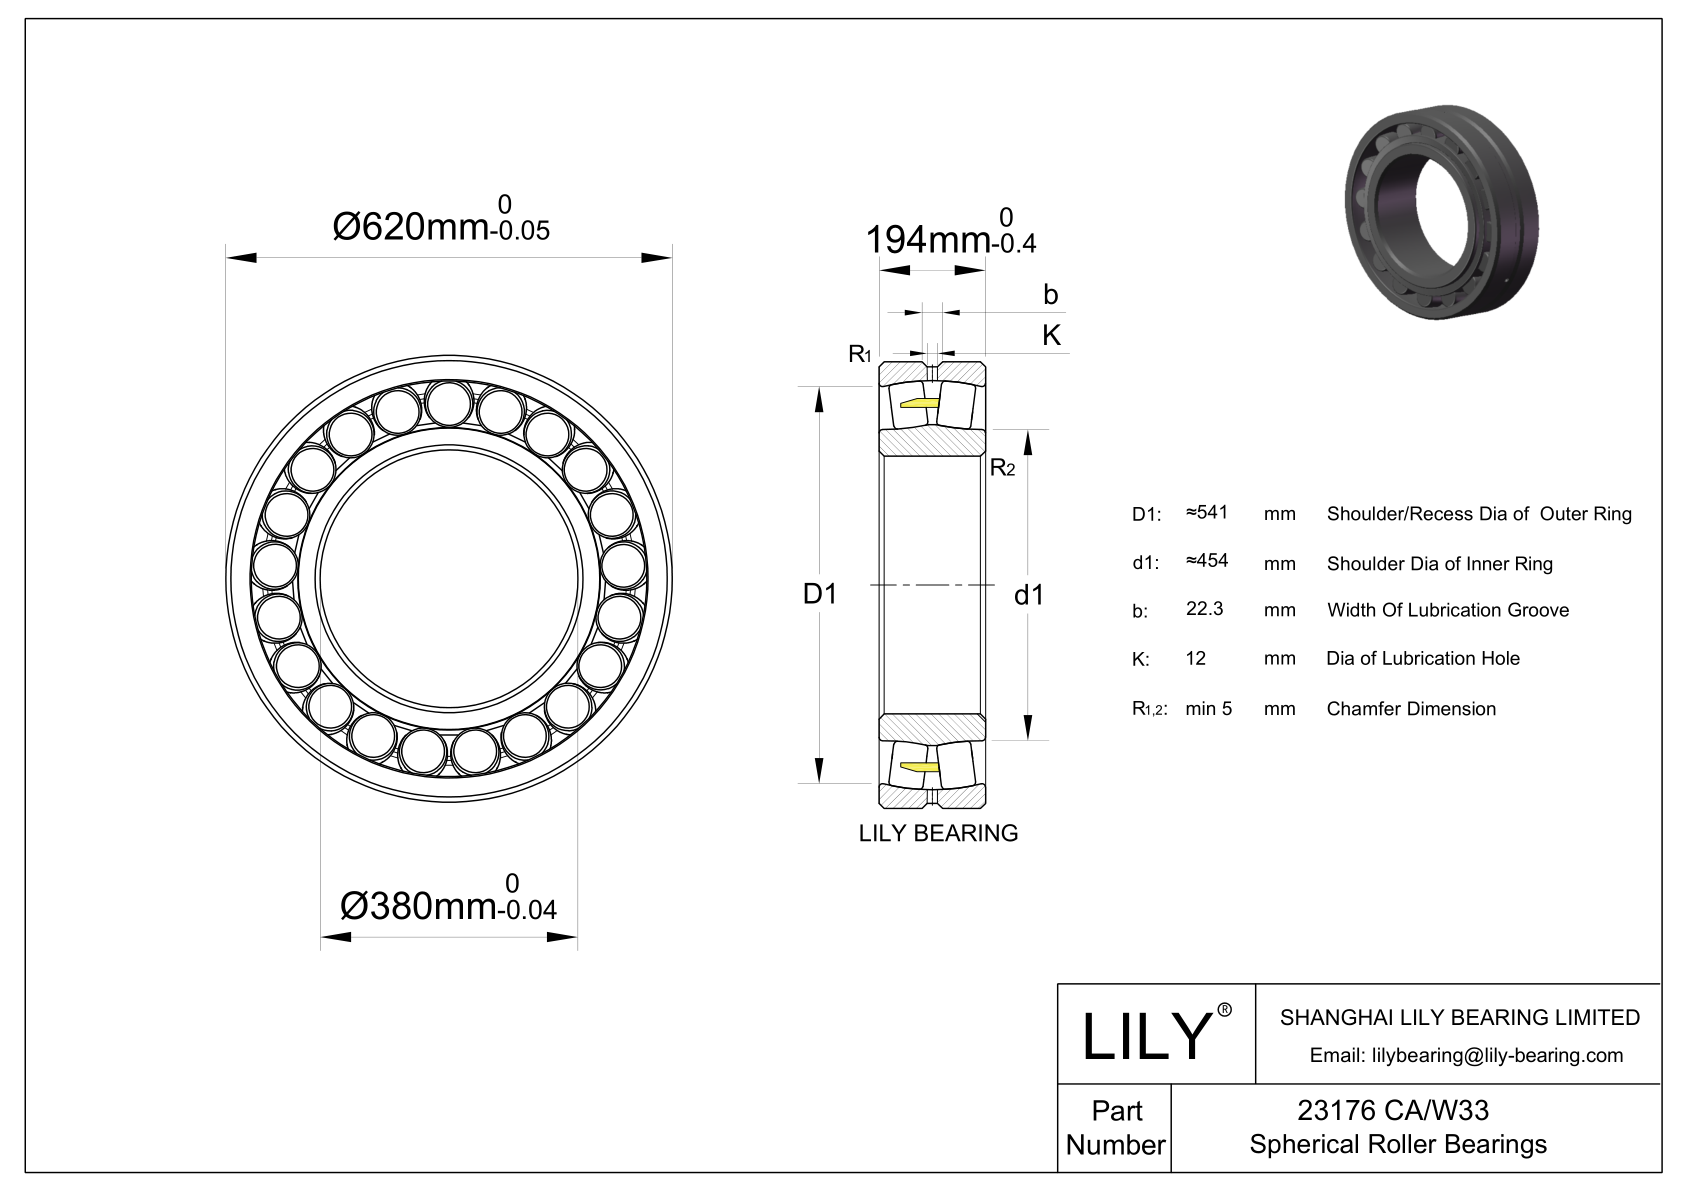 23176 CA/W33 Double Row Spherical Roller Bearing cad drawing